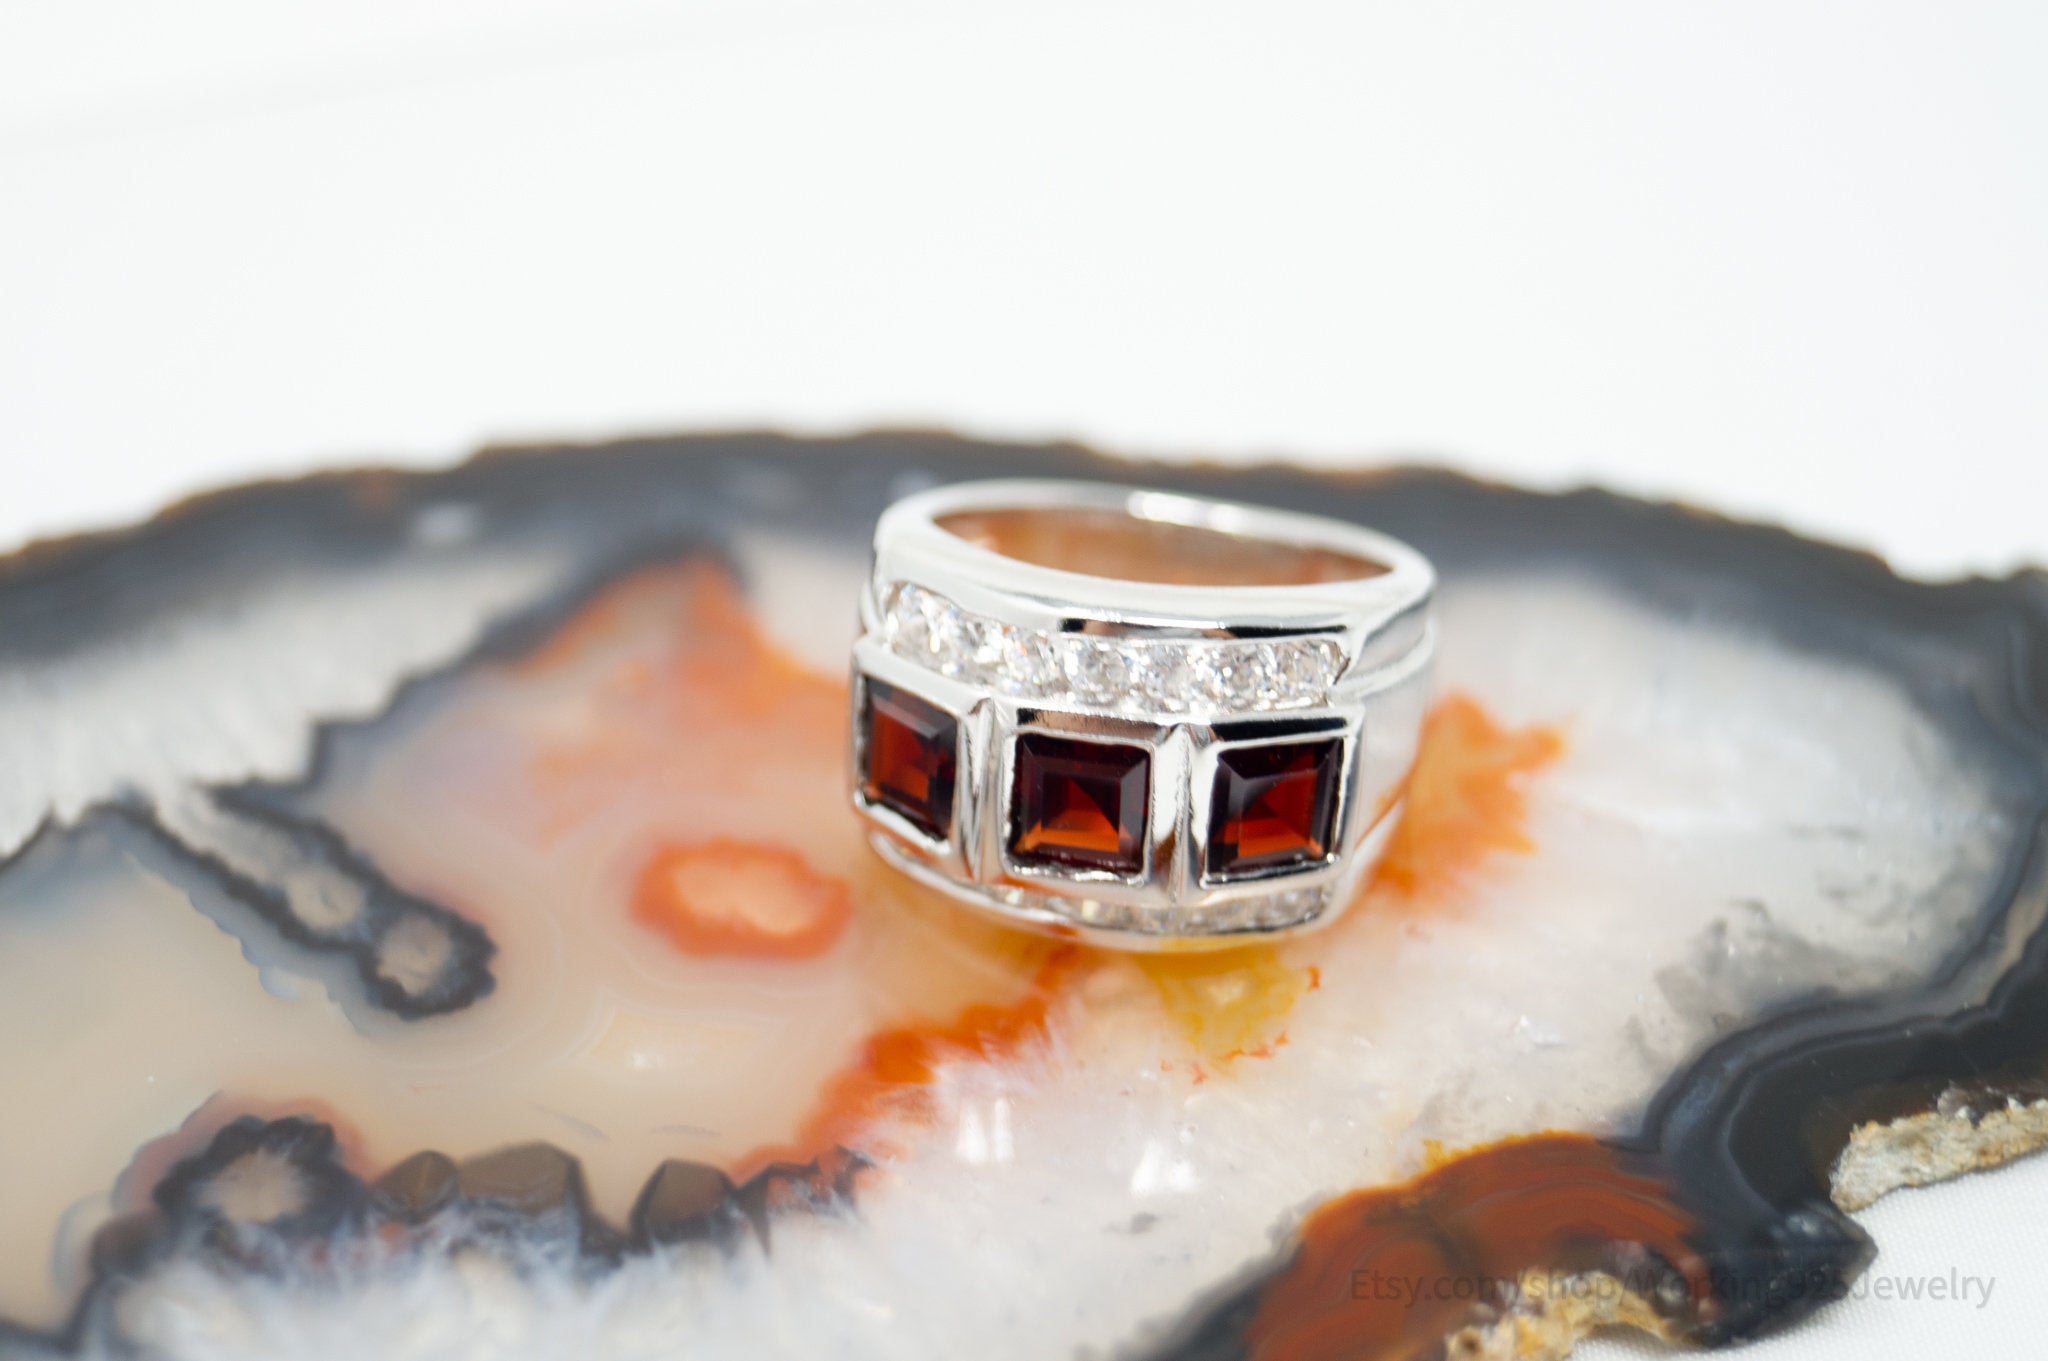 Vintage Art Deco Style Red Garnet CZ Sterling Silver Ring Size 6.75